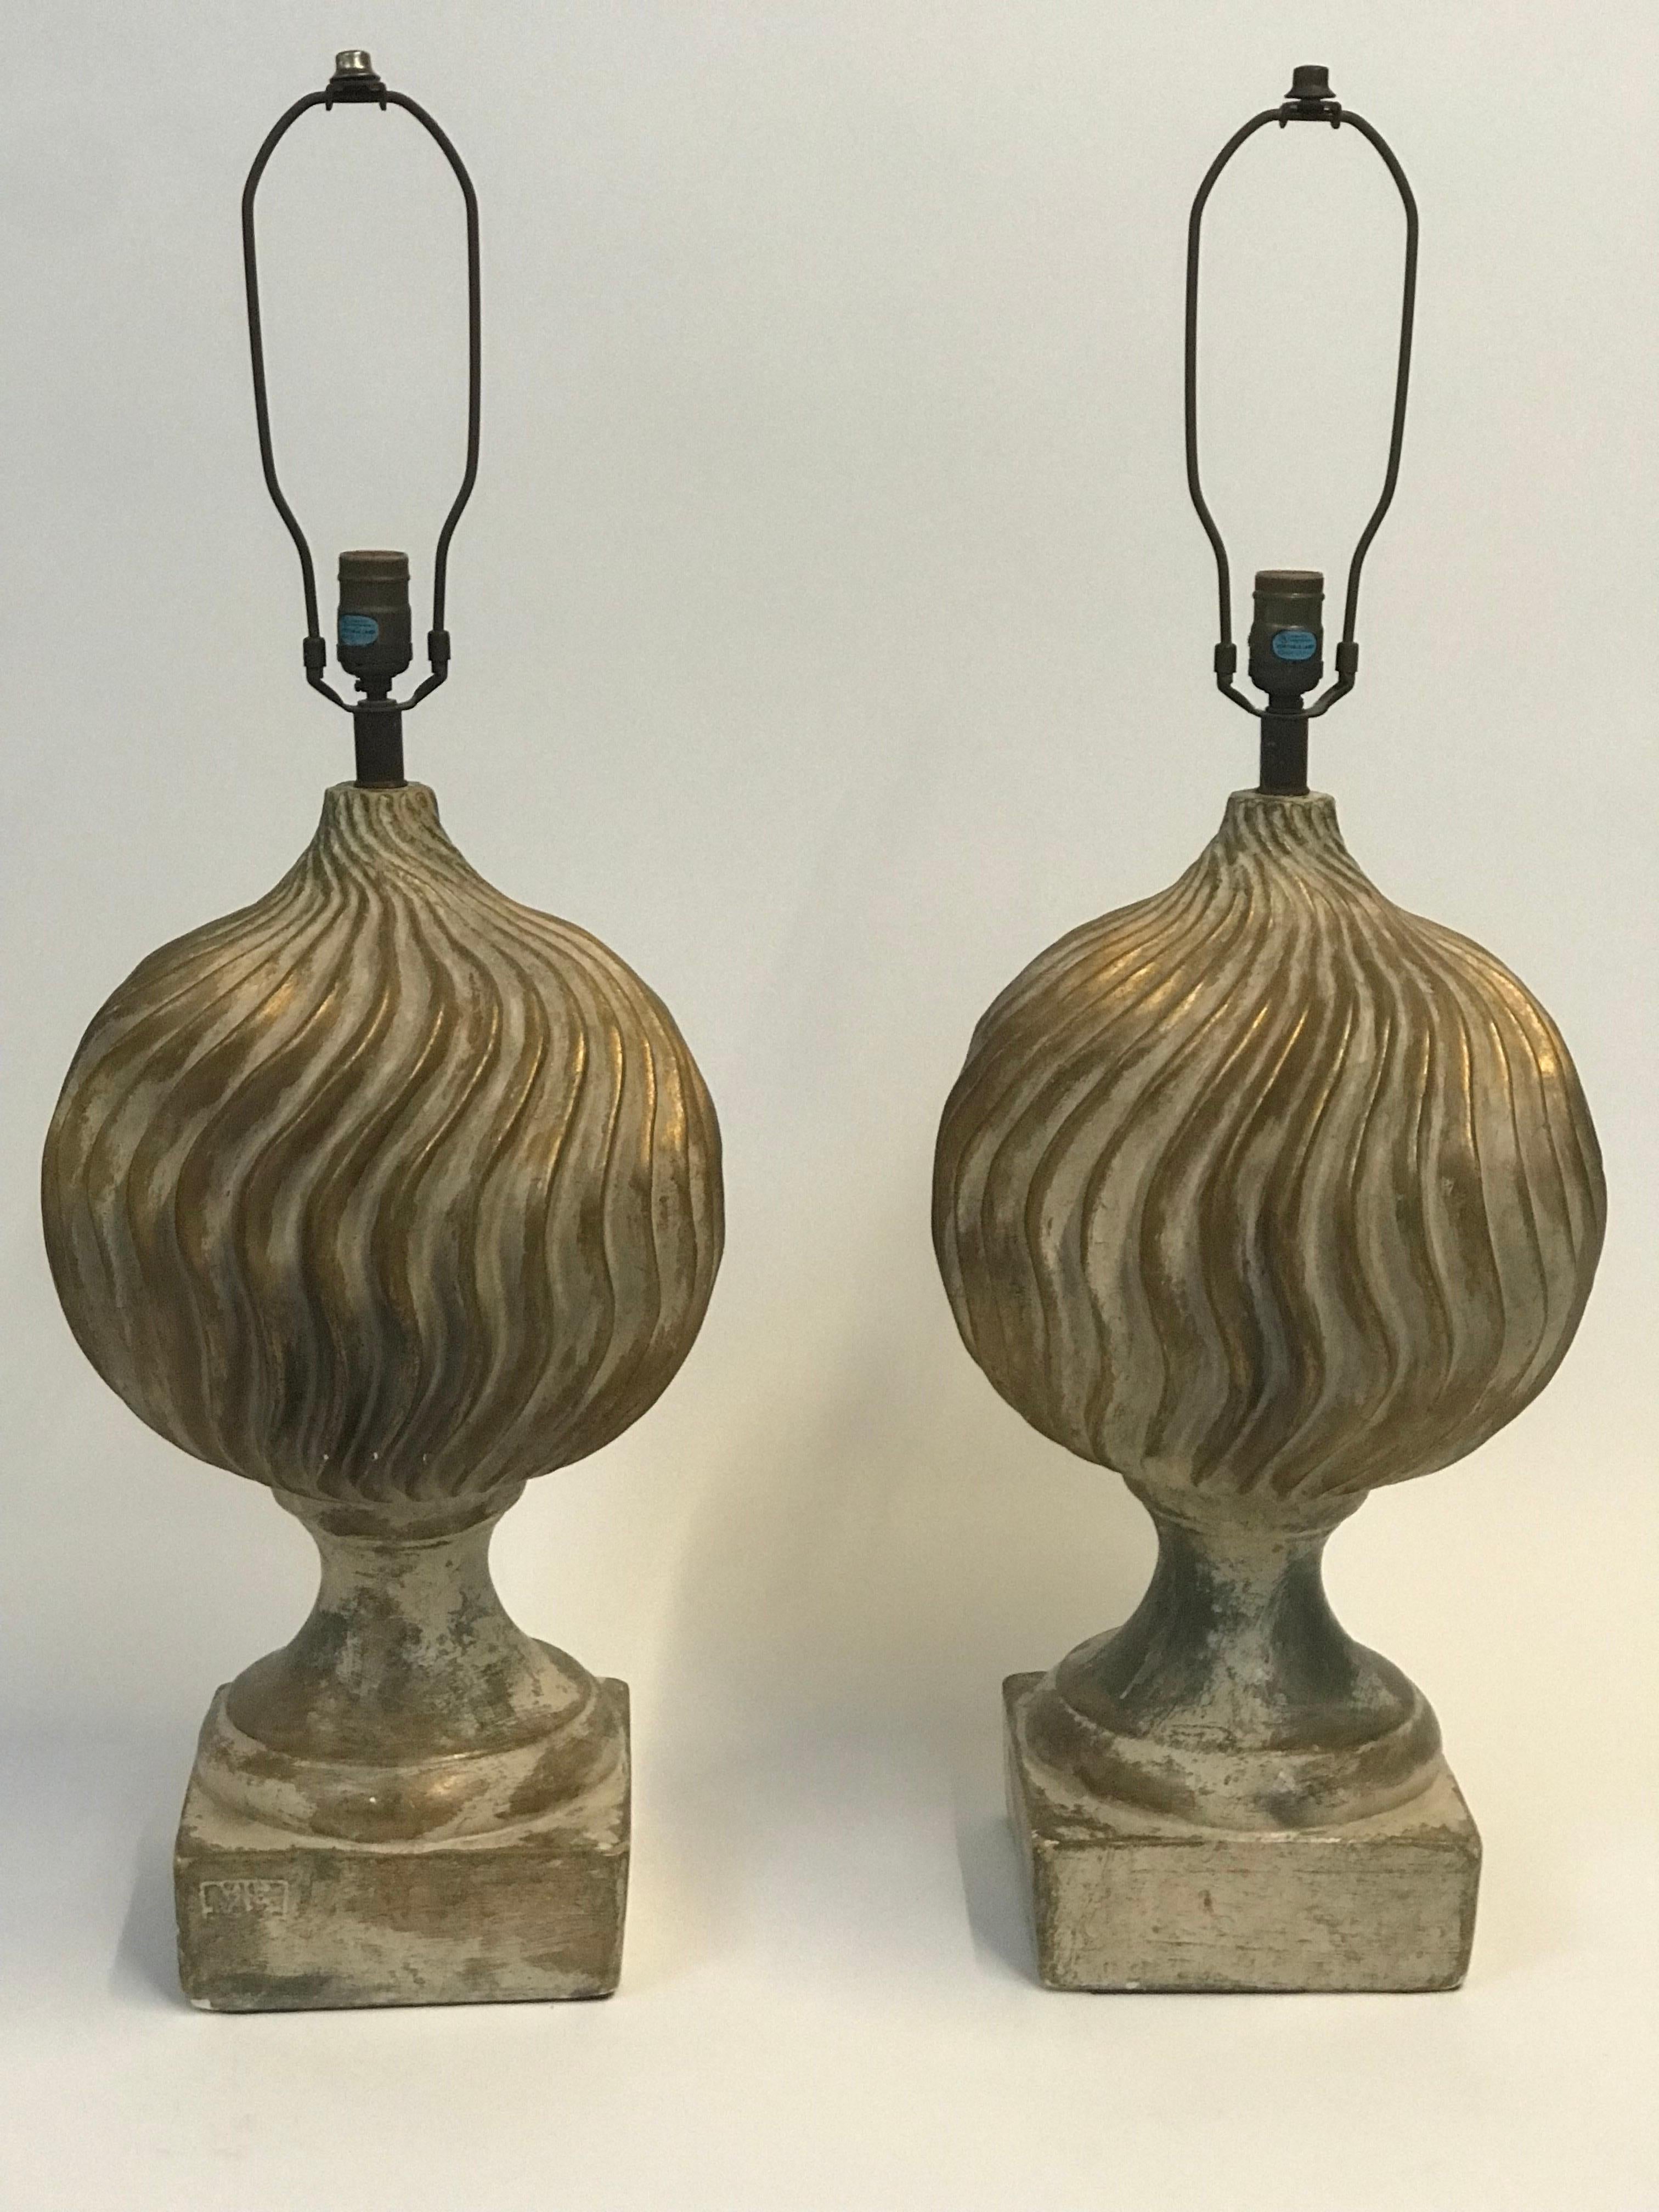 A large format pair of plaster table lamps in a 1950’s stylised neoclassical form consisting of a complex wave ribbed globe rising from a traditional form plinth like base and finished in a rubbed distressed gilt semi metallic glaze with inclusions